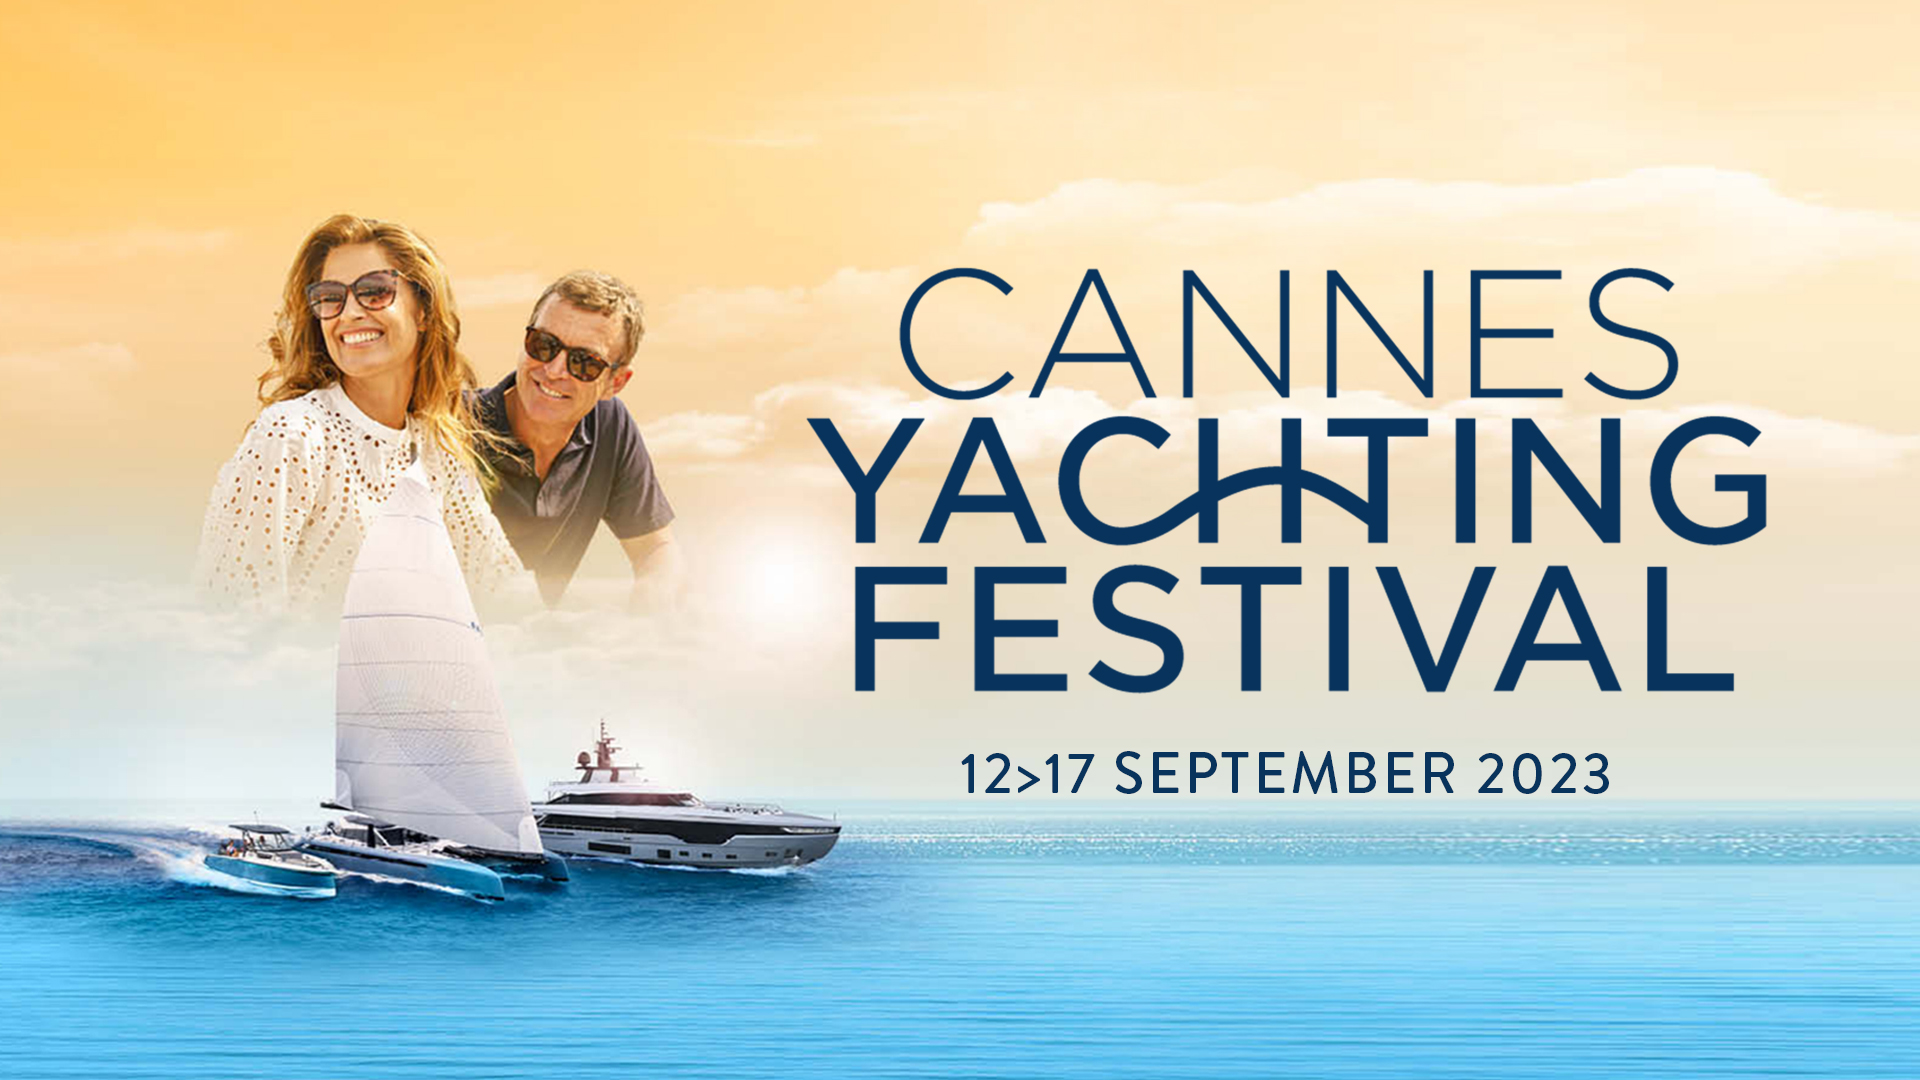 Cannes Yachting Festival 12-17 September 2023